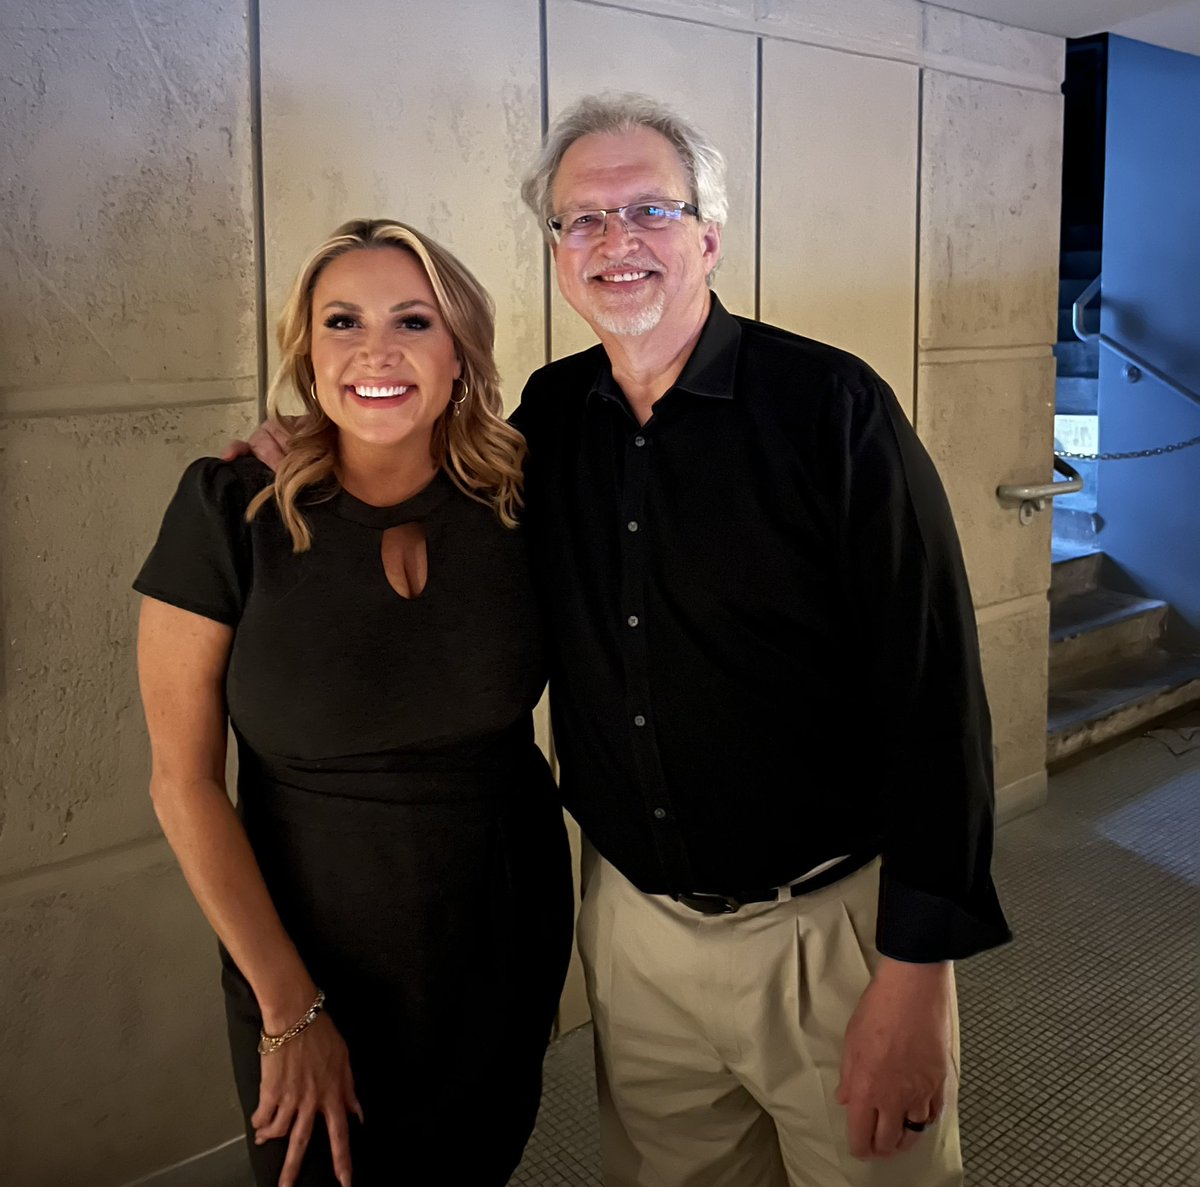 Congratulations to Professor Joe Russomanno on your retirement! For 30 years, Joe’s guided Cronkite students toward their dreams and I was one of those students. Thank you, Joe, for believing in me!